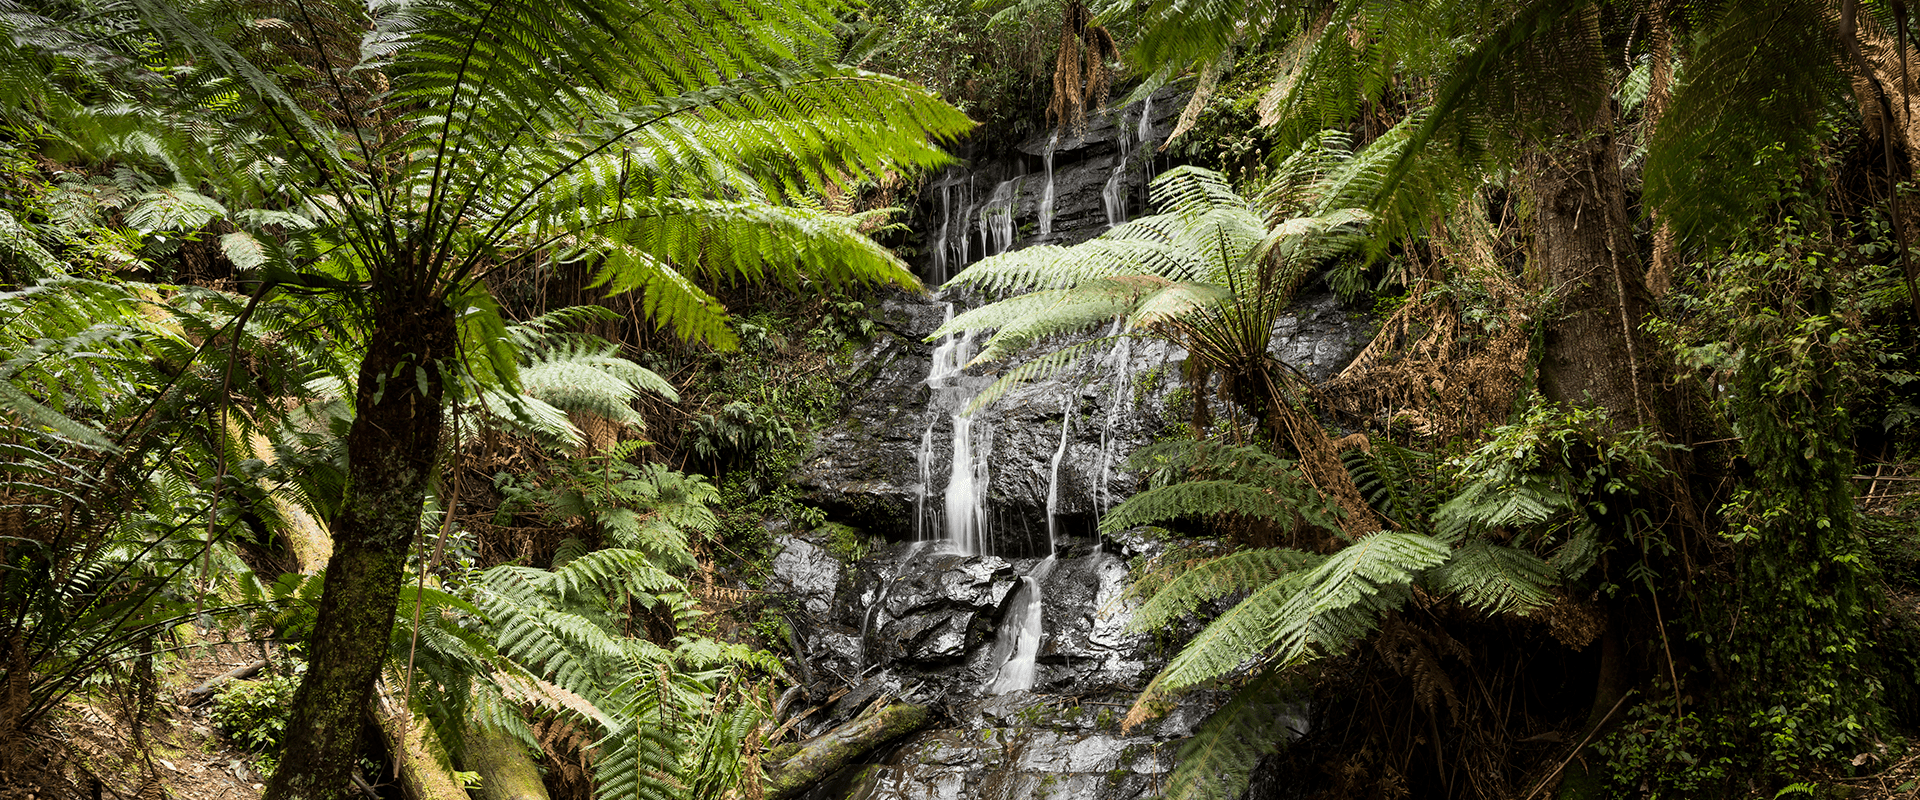 Water trickles down a rock face on a small waterfall surrounded by lush tree ferns and a dense ground cover.